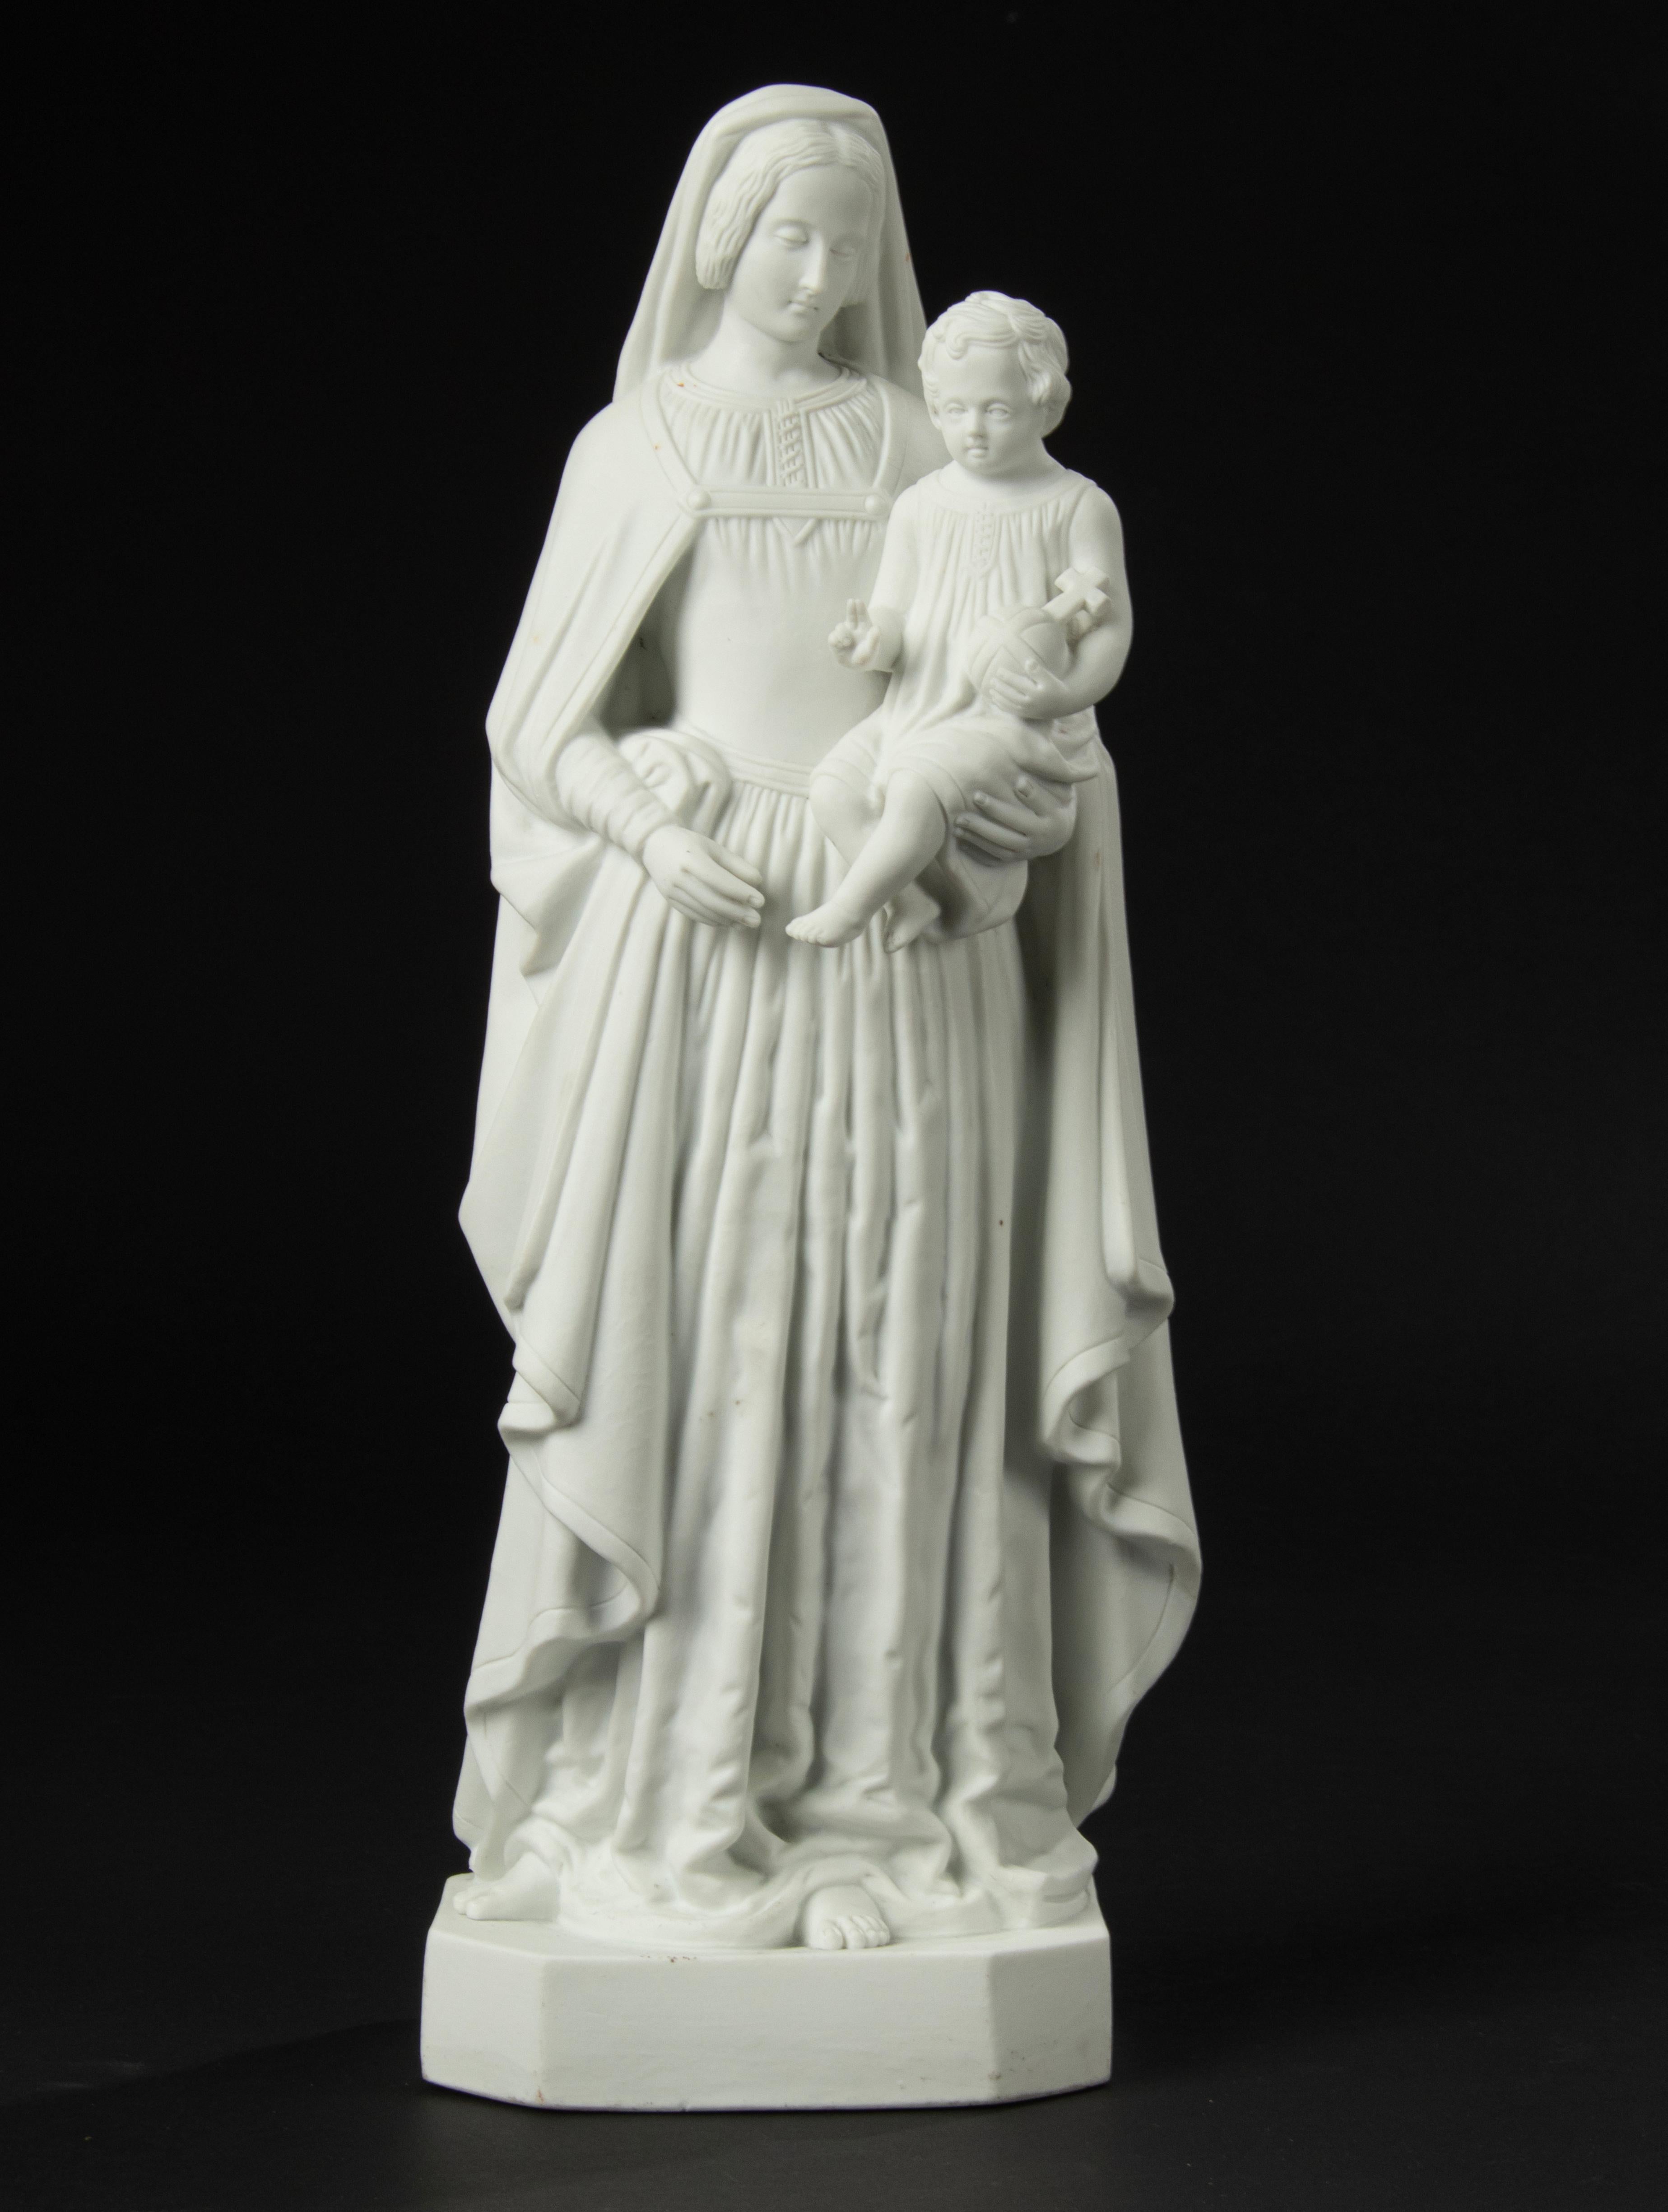 Beautiful biscuit porcelain sculpture, depicting Mary with baby Jesus on her arm.
The sculpture is marked on the bottom, but the sign is not clear. Maker unknown.
The statue is in very good condition. Free Shipping.